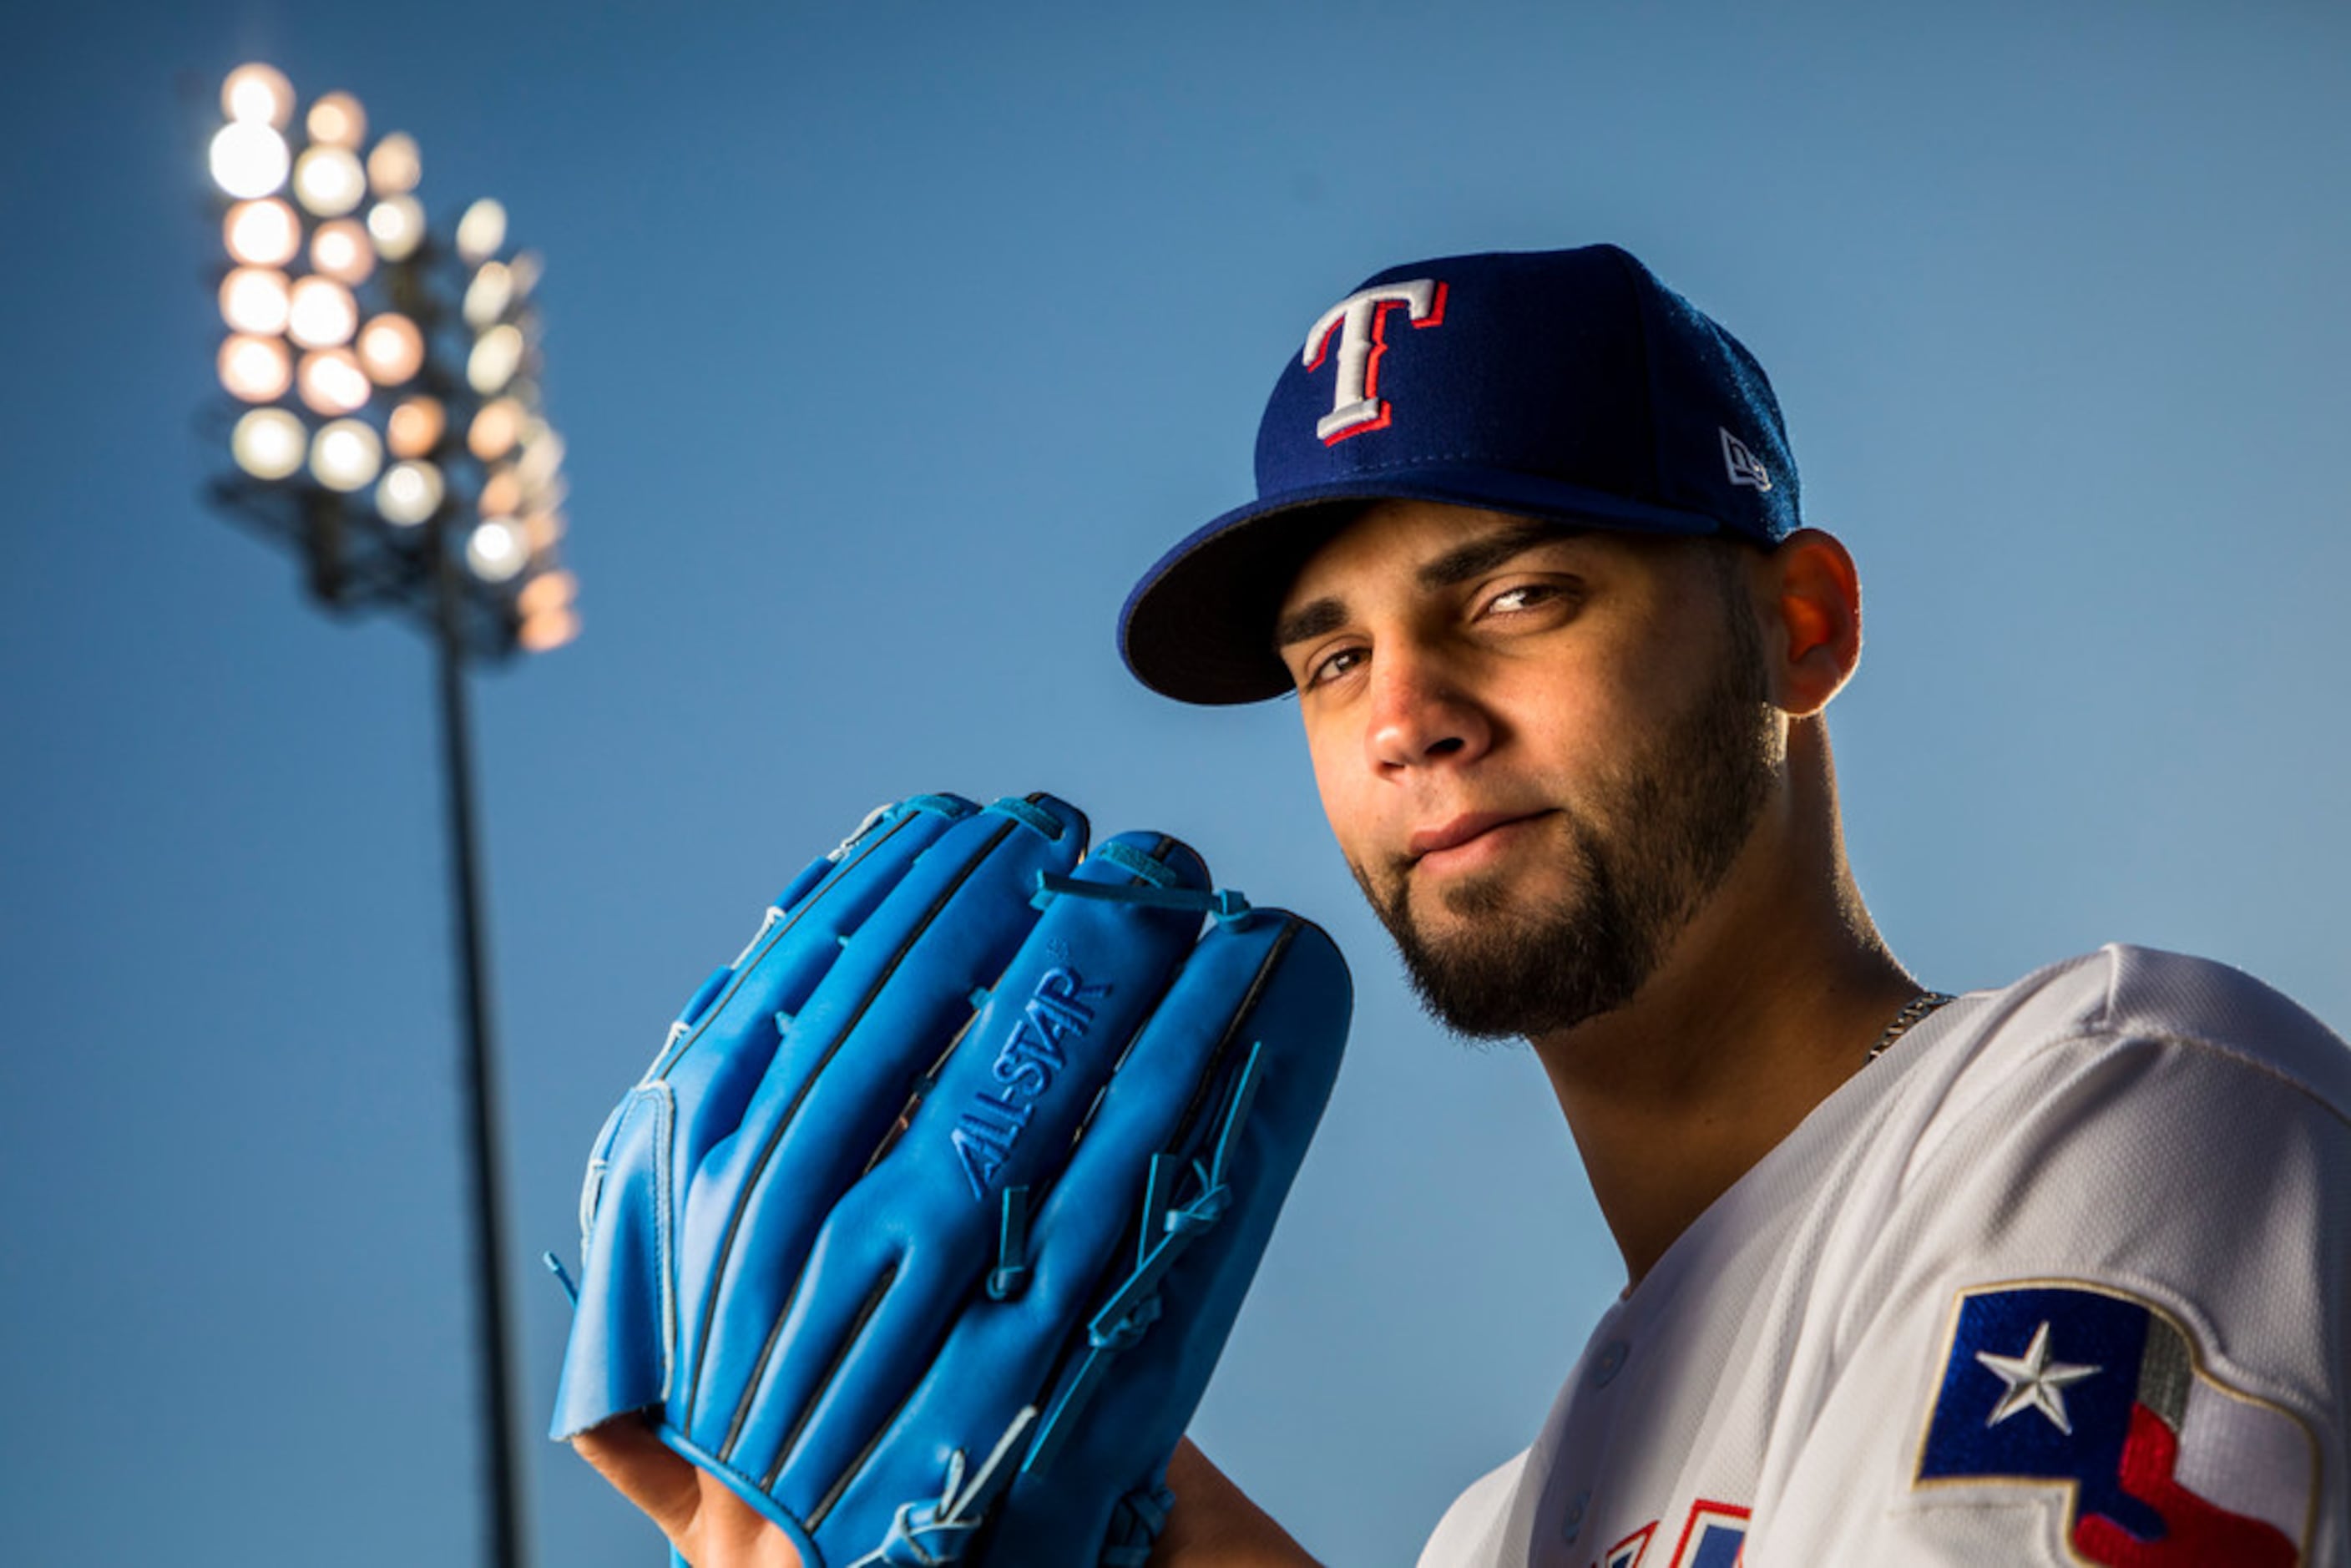 Rangers top prospects, relief pitchers: Which youngster is following the  path blazed by Alex Claudio?